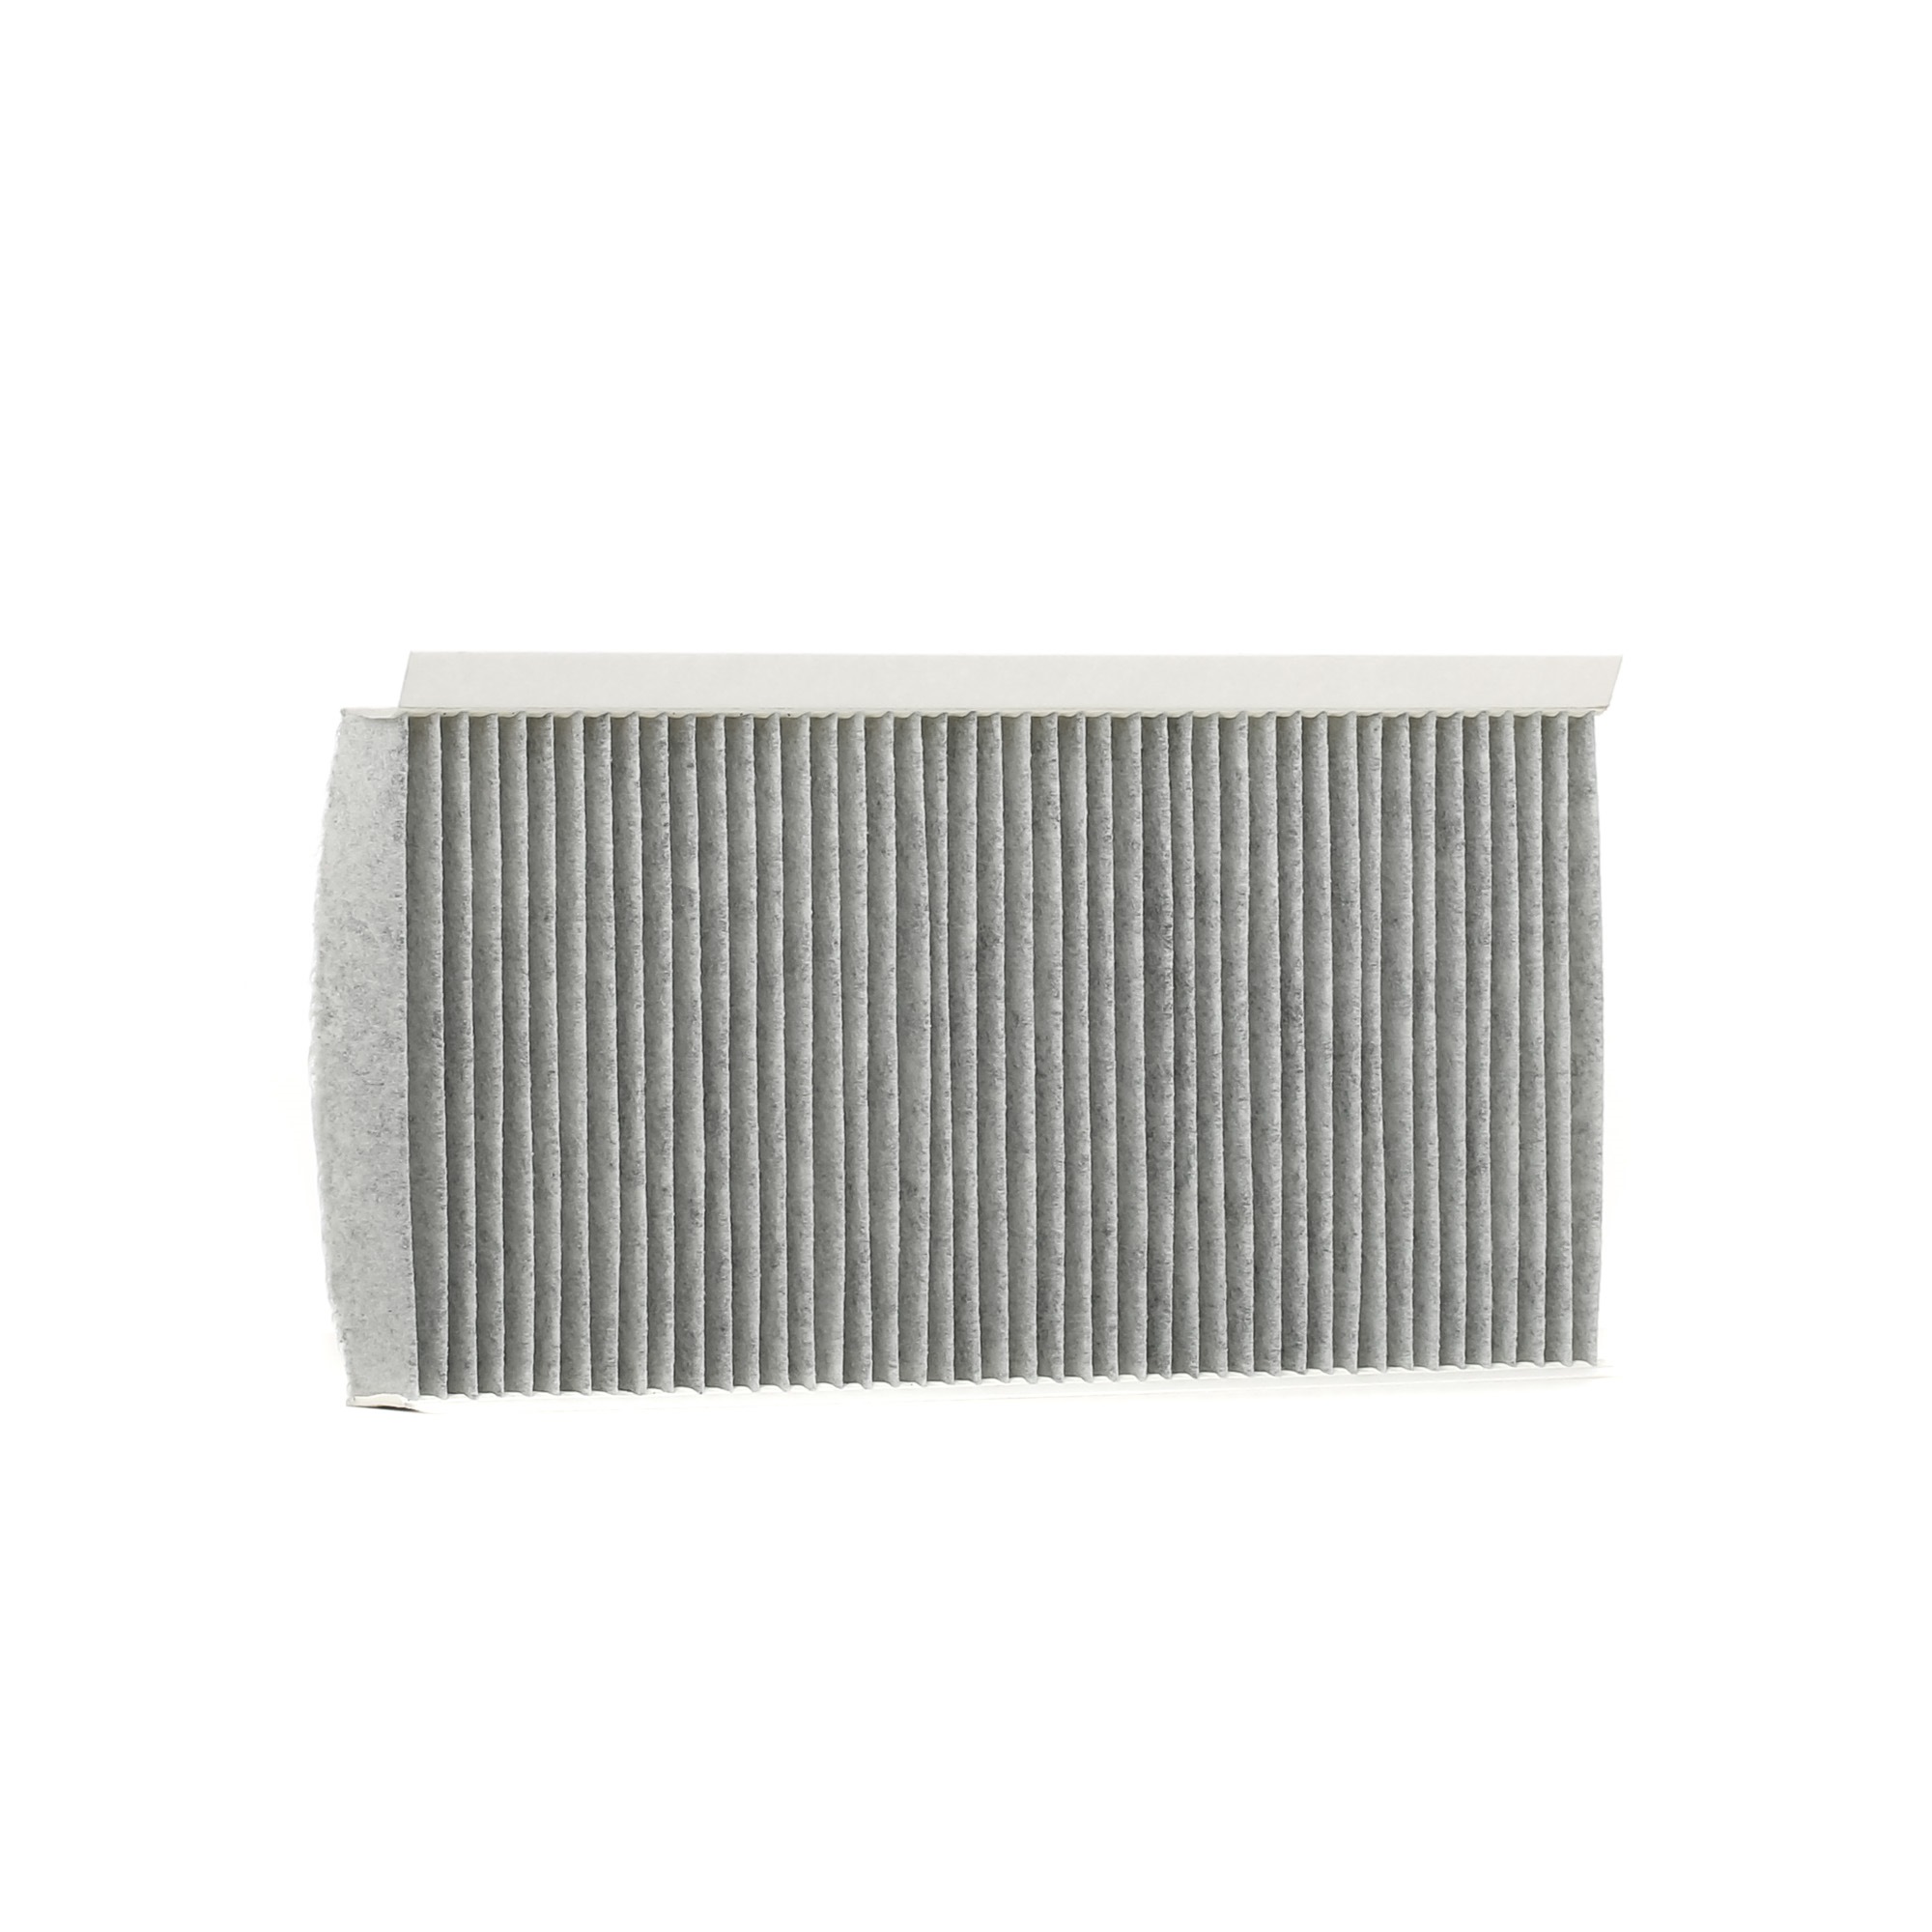 DELPHI Activated Carbon Filter, 330 mm x 162 mm x 30 mm Width: 162mm, Height: 30mm, Length: 330mm Cabin filter TSP0325296C buy